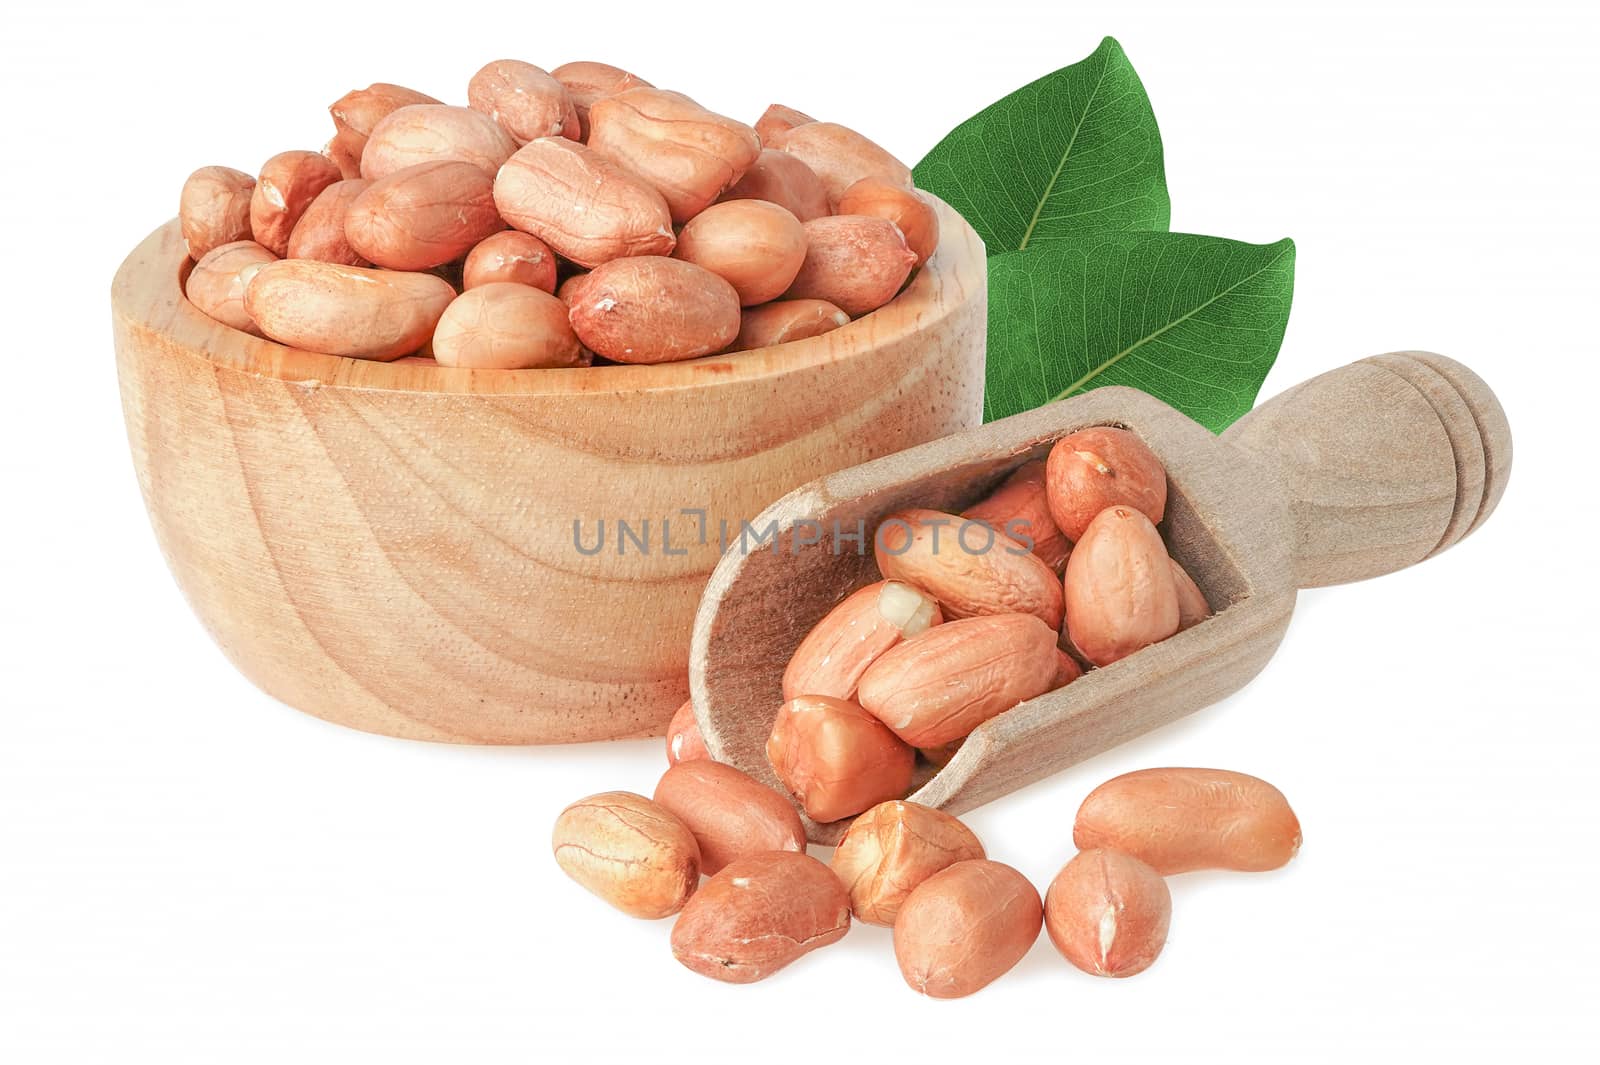 Peanuts in wooden blow natural grain seeds isolated on white background with clipping path. by pamai